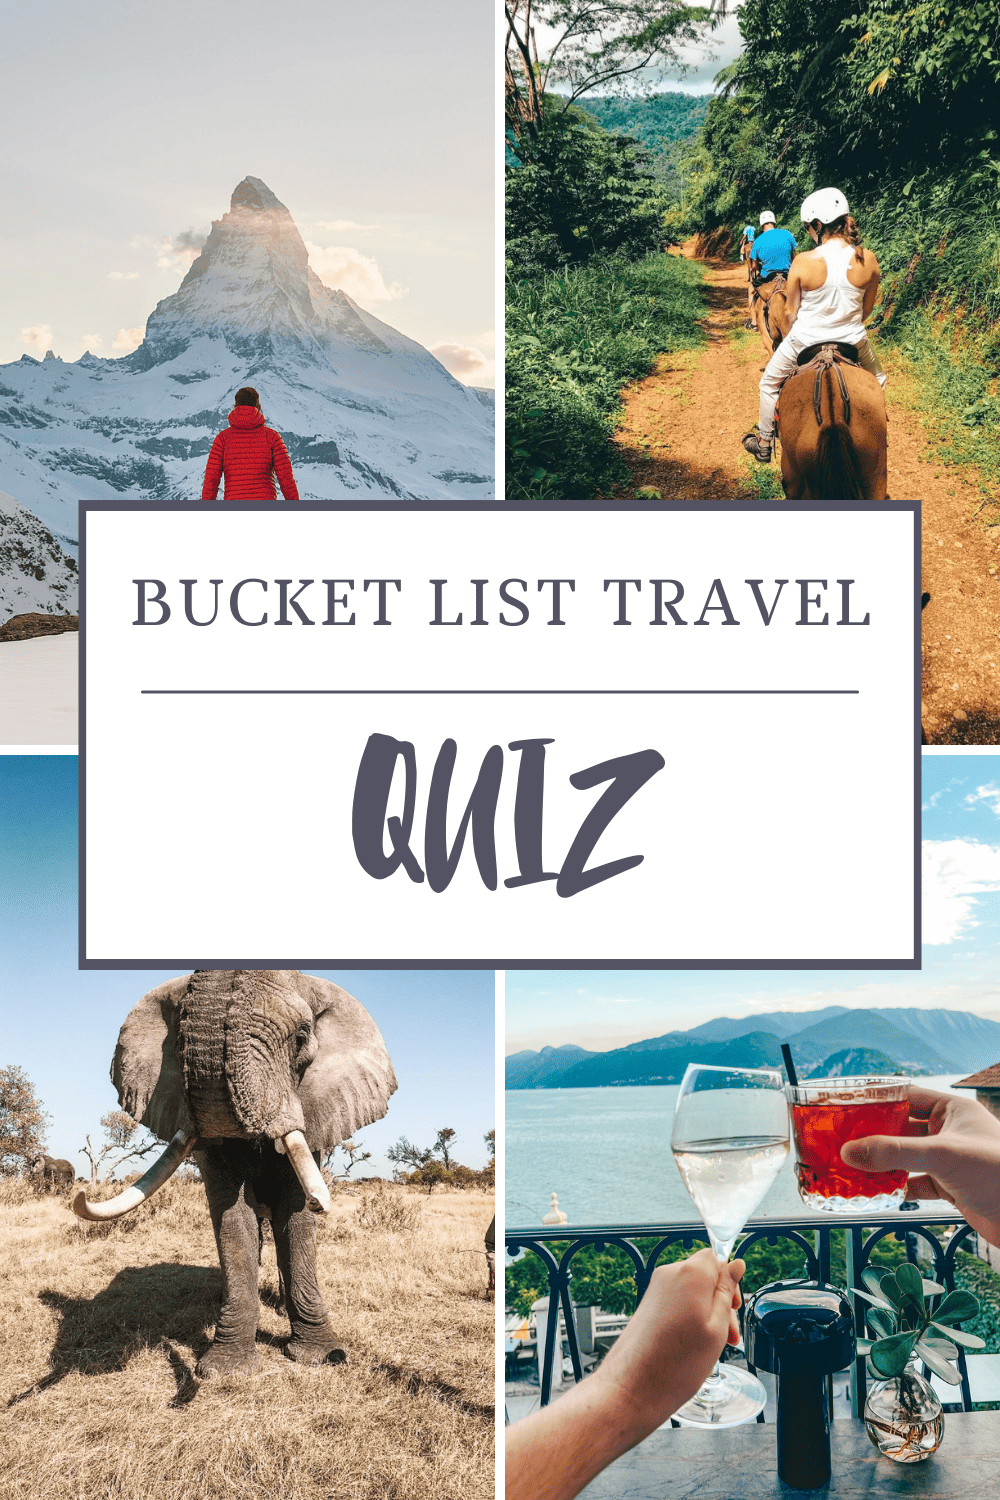 pinterest pin with four pictures and text saying bucket list travel quiz